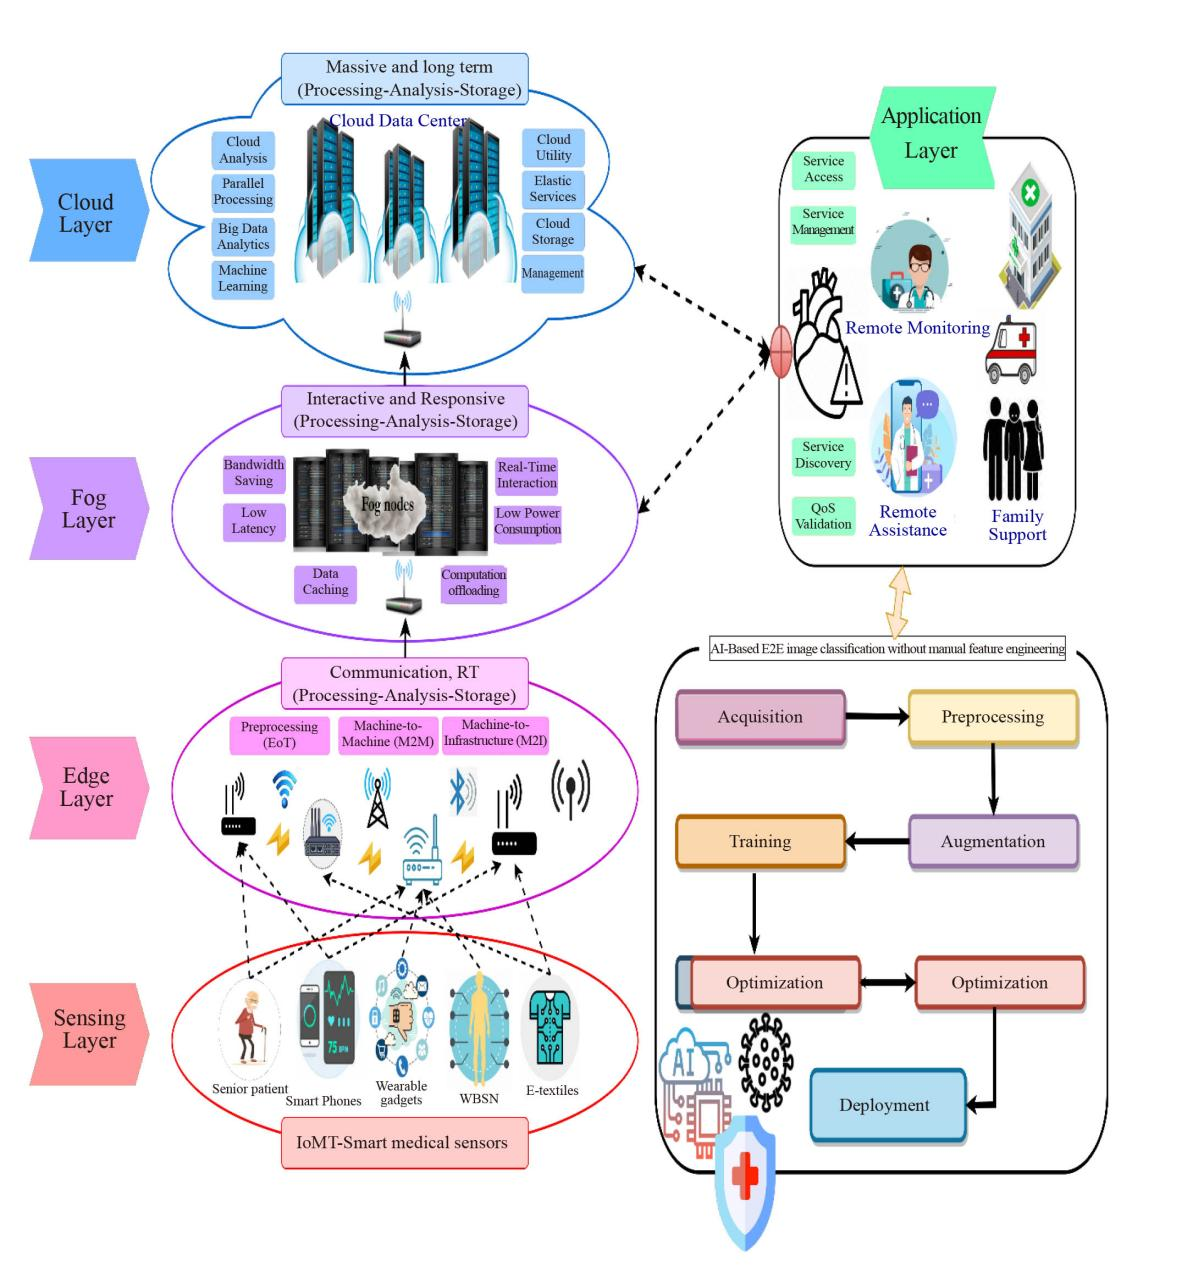 Integrating Artificial Intelligence and Big Data into Smart Healthcare Systems: A Comprehensive Review of Current Practices and Future Directions